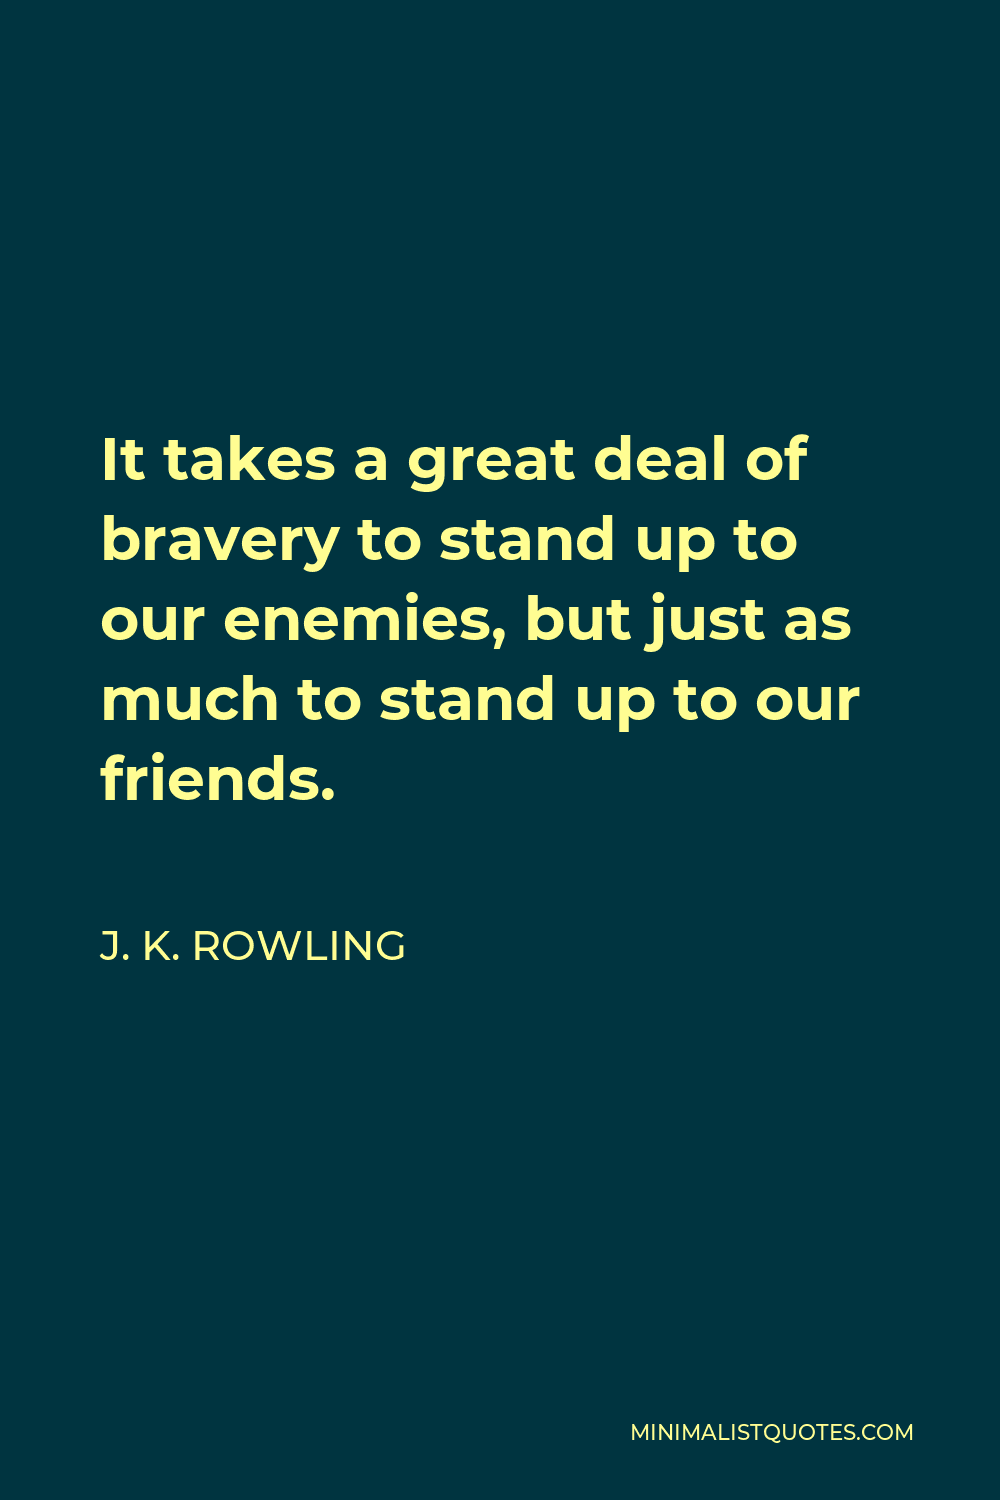 J. K. Rowling Quote - It takes a great deal of bravery to stand up to our enemies, but just as much to stand up to our friends.